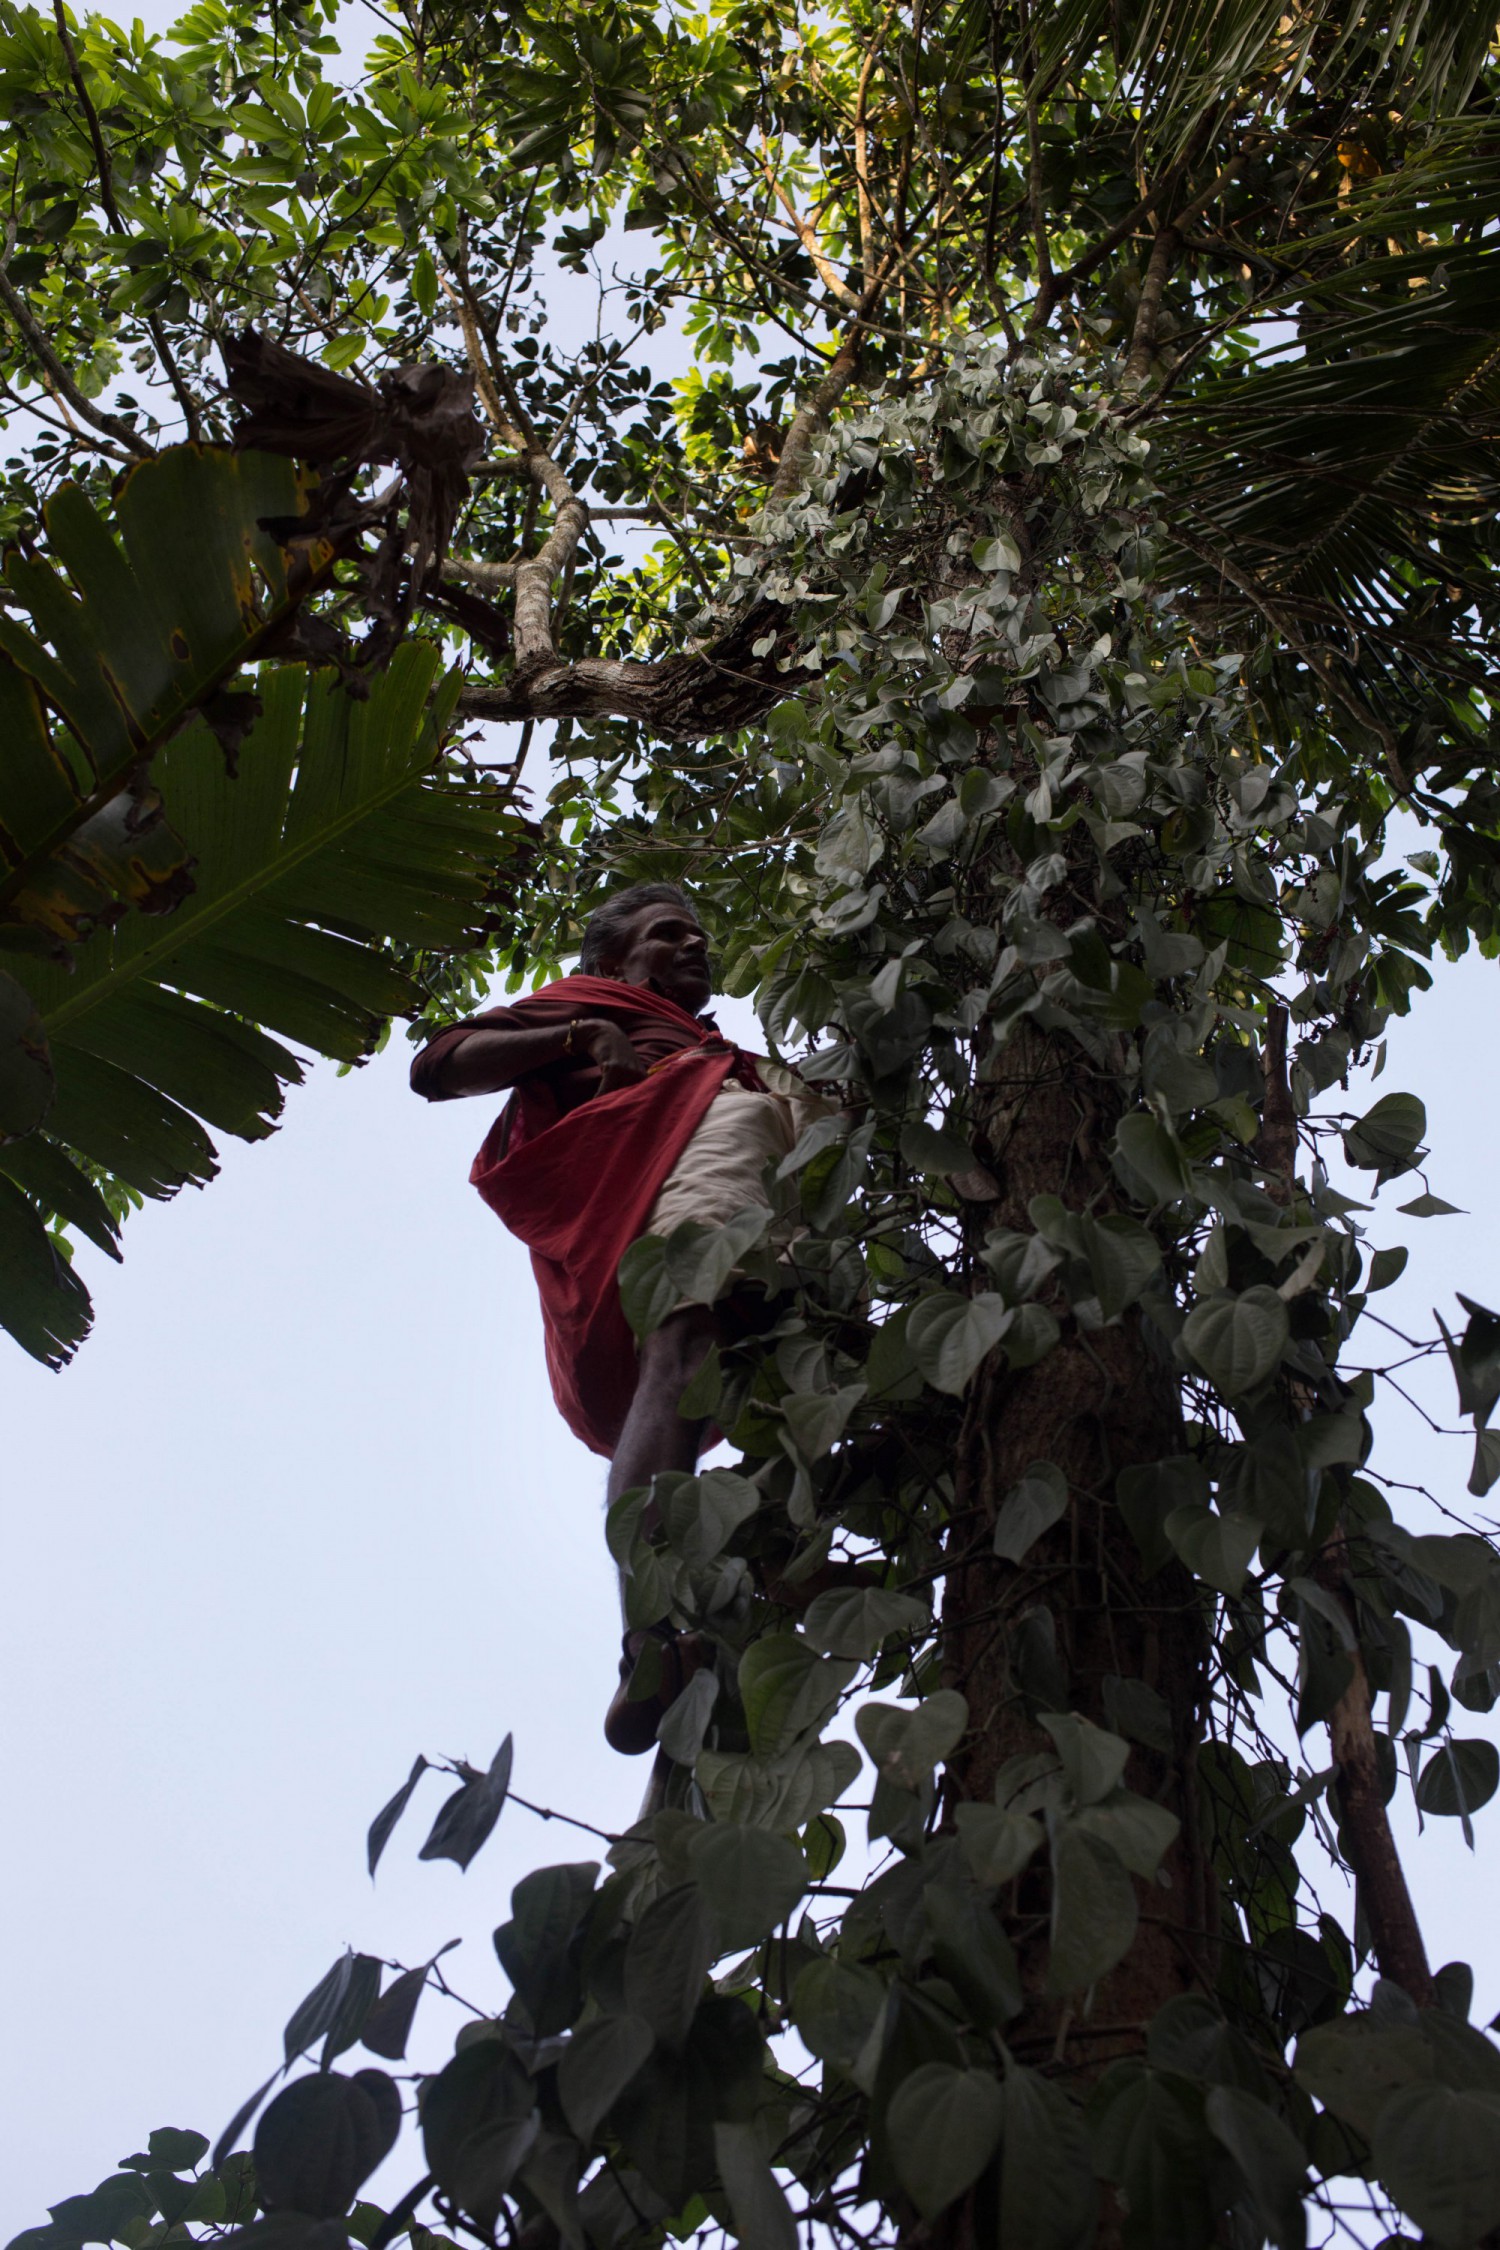 It is the end of pepper season and Kesavan climbs up to pick one of the last fruiting vines. Pepper is a coveted cash crop in Wayanad, often referred to as ‘black gold’. Kerala has a long history of exporting pepper, dating back to the days of the silk route.